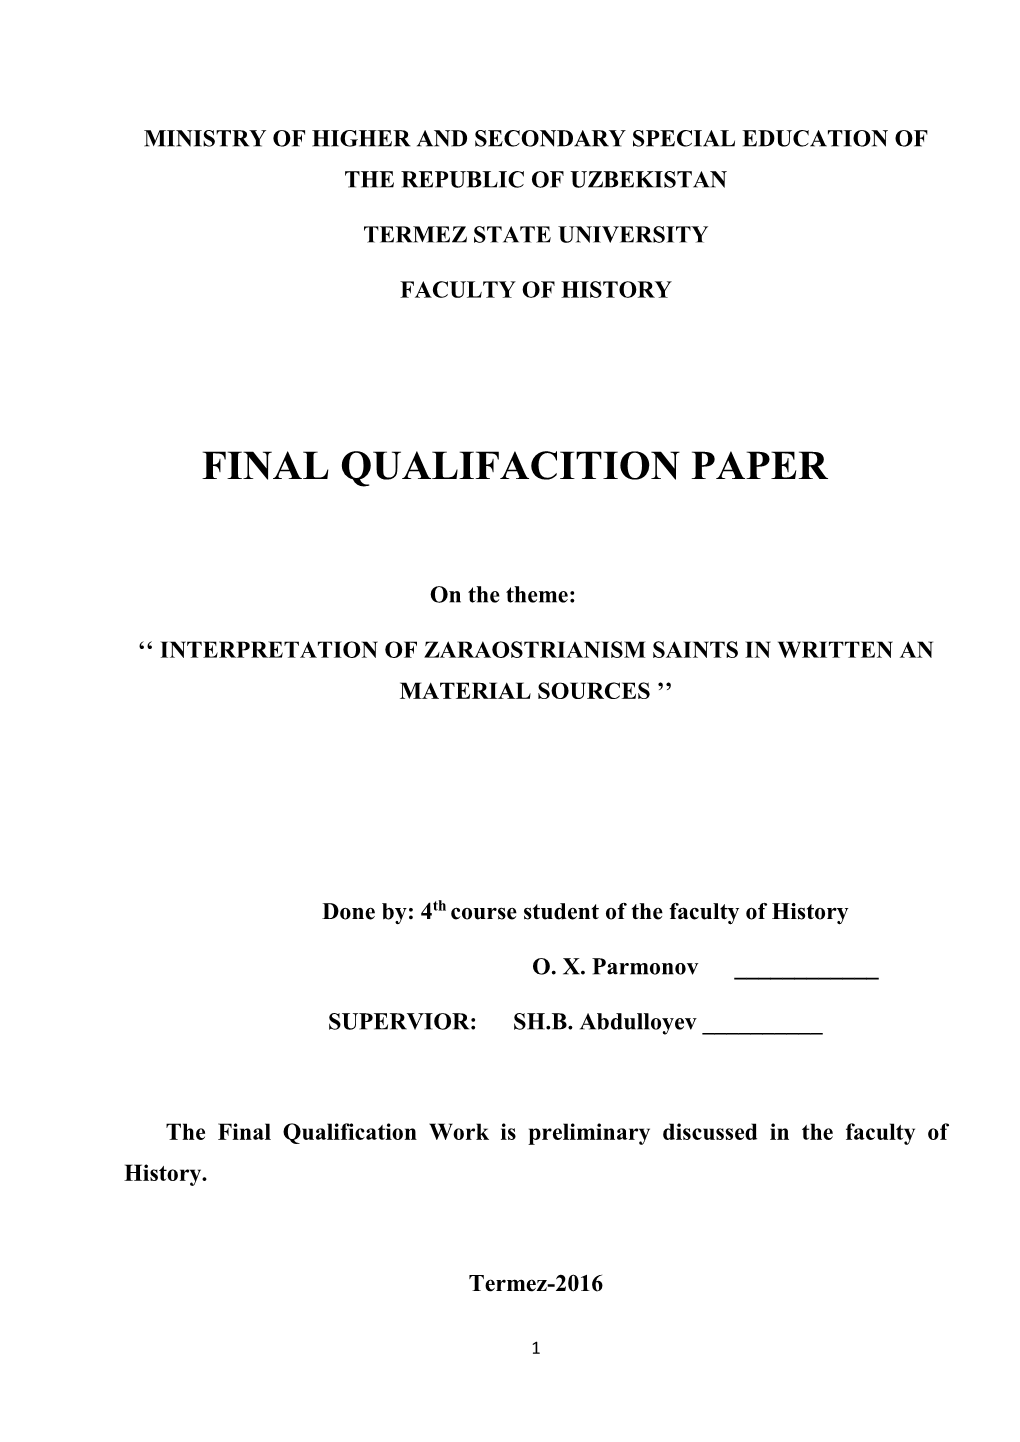 Final Qualifacition Paper